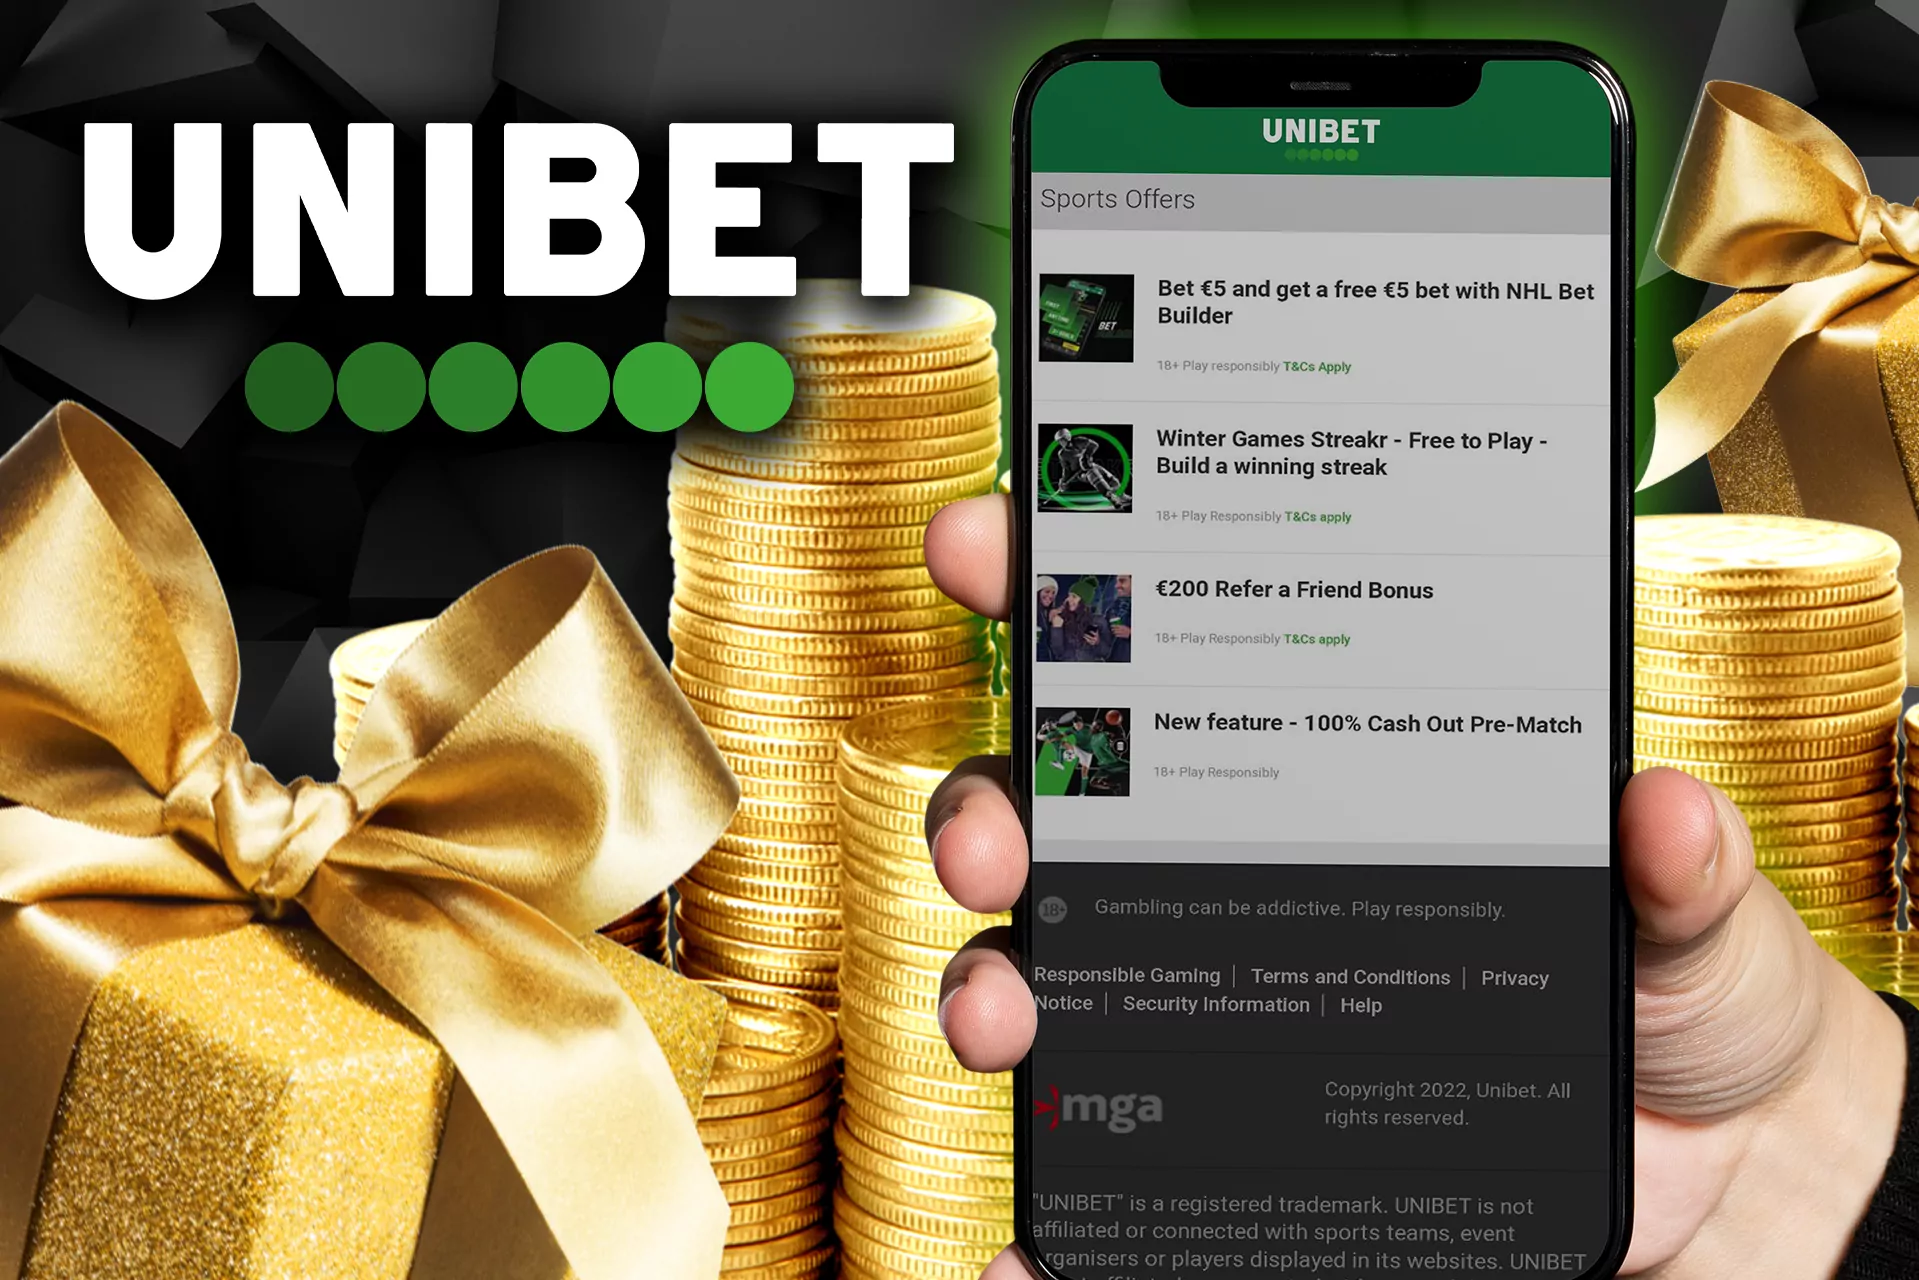 You can also get bonuses in the Unibet app for Android and iOS.